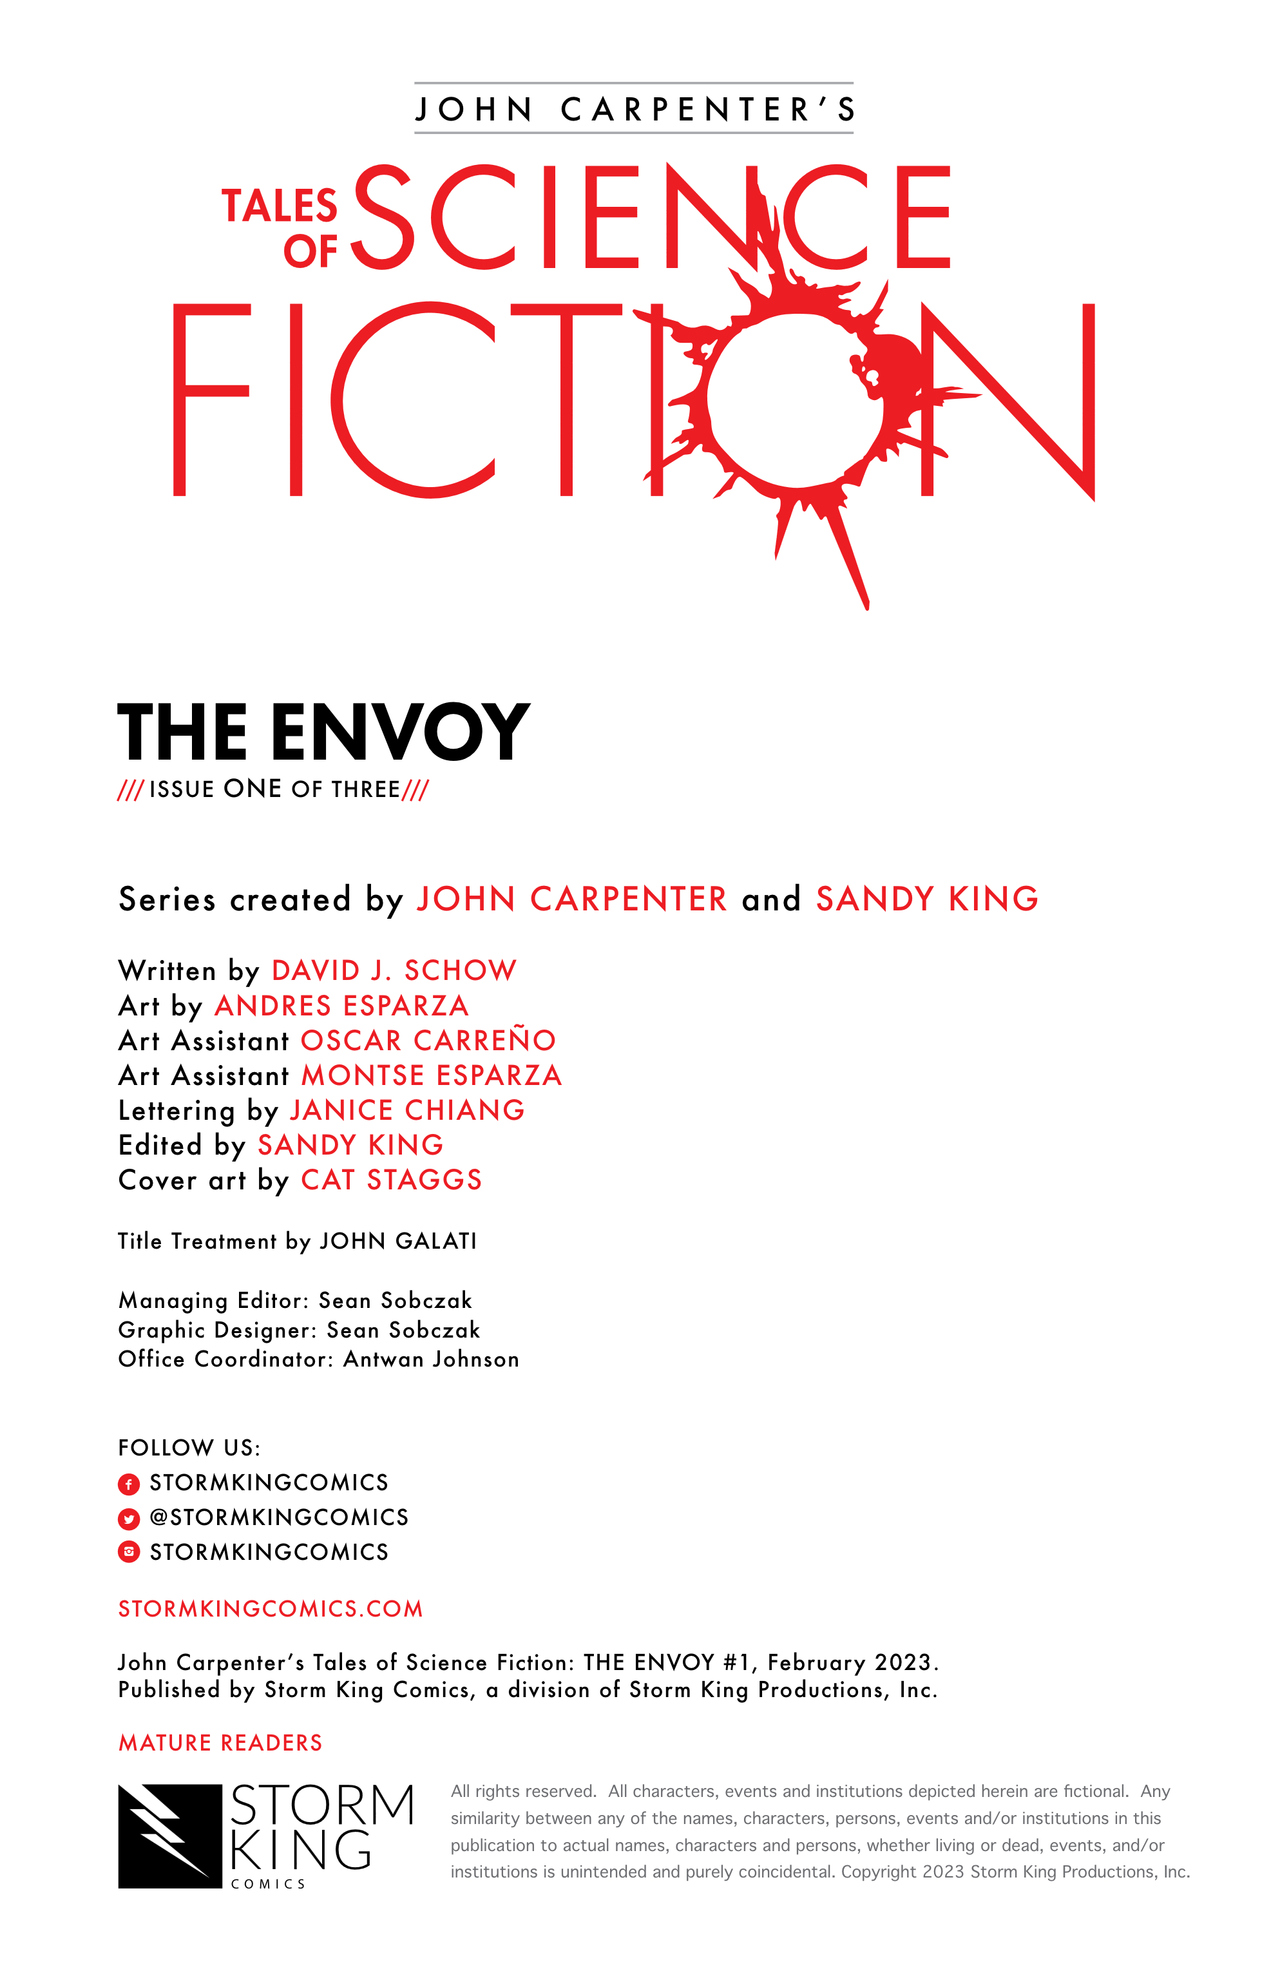 Read online John Carpenter's Tales of Science Fiction: The Envoy comic -  Issue #1 - 2